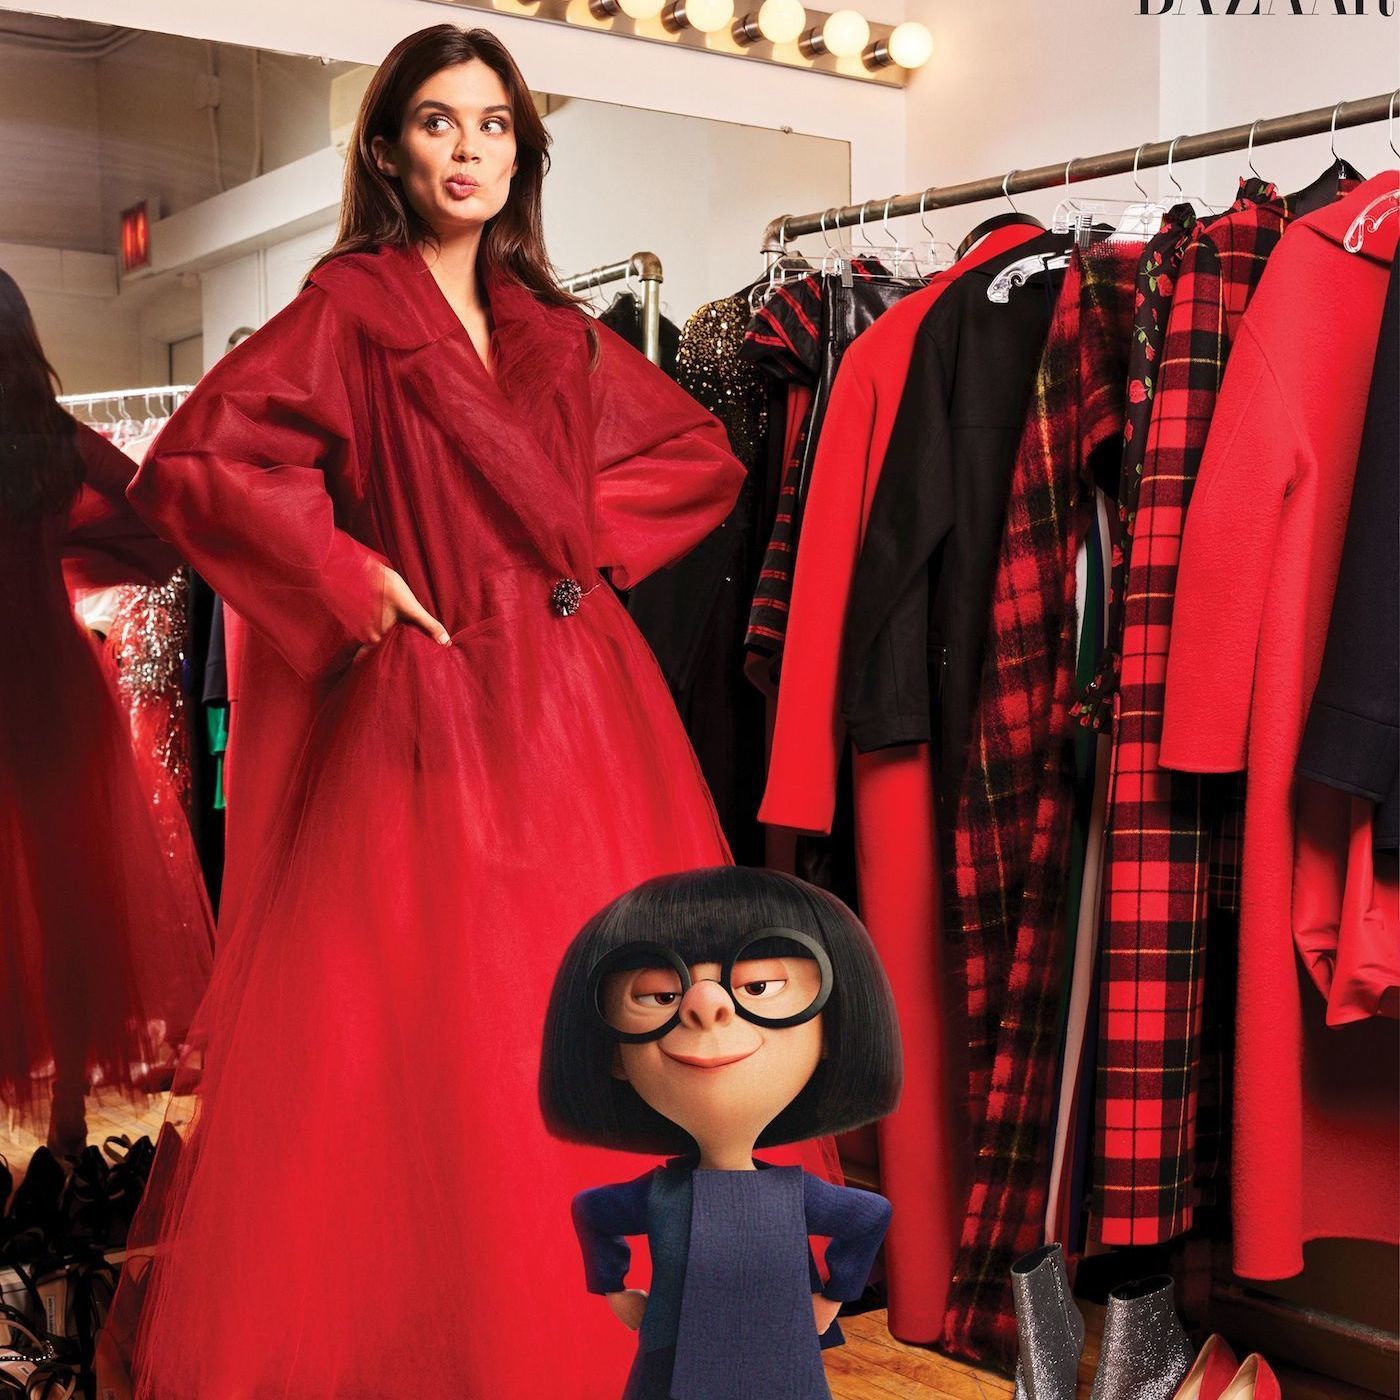 Edna Mode is the fashion icon of our time